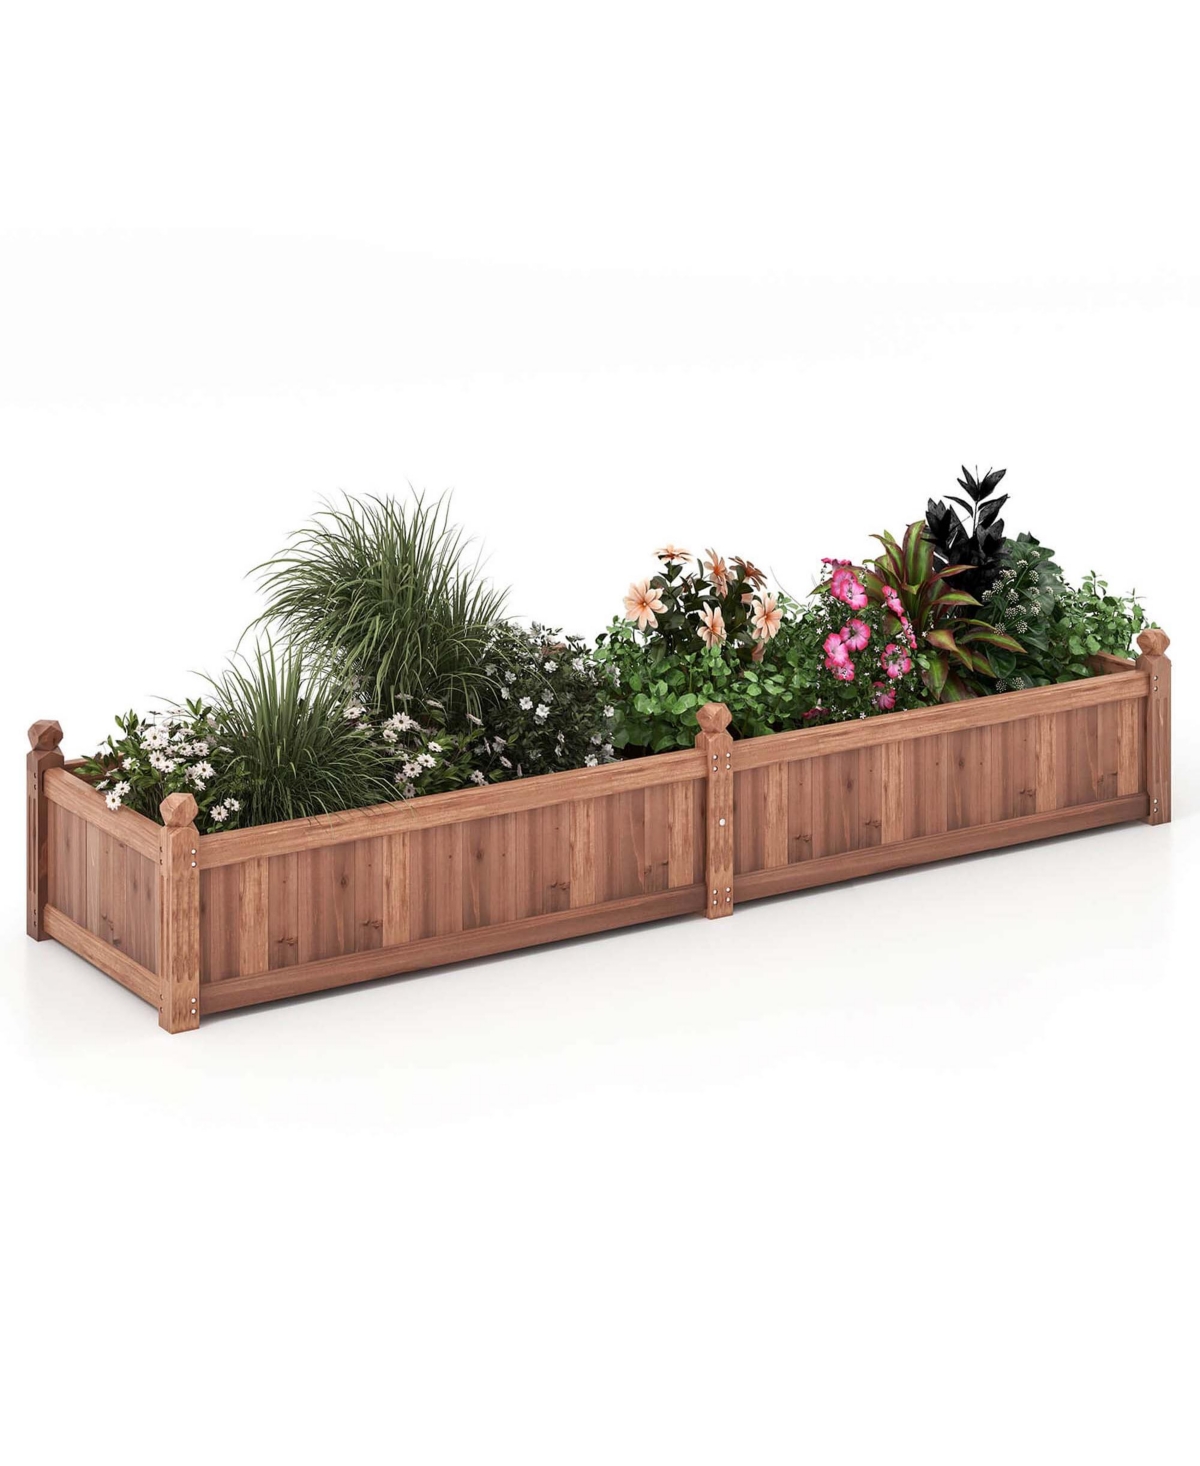 Wooden Raised Garden Bed Outdoor Rectangular Planter Box with Drainage Holes - Brown